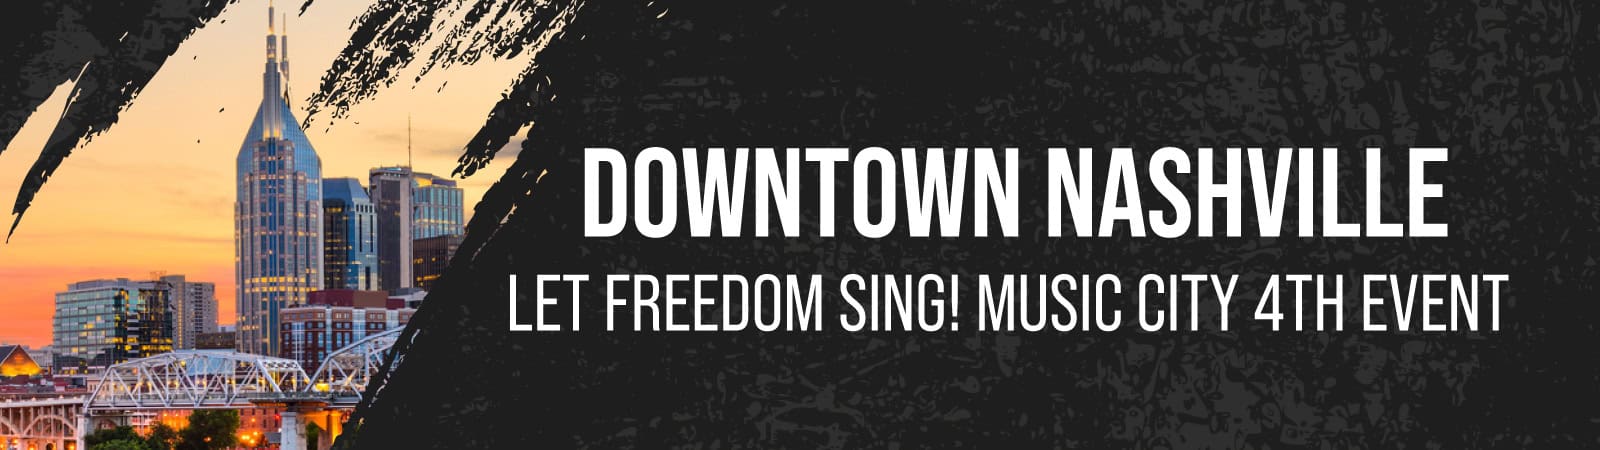 Let Freedom Sing! Music City July 4th event in Downtown Nashville